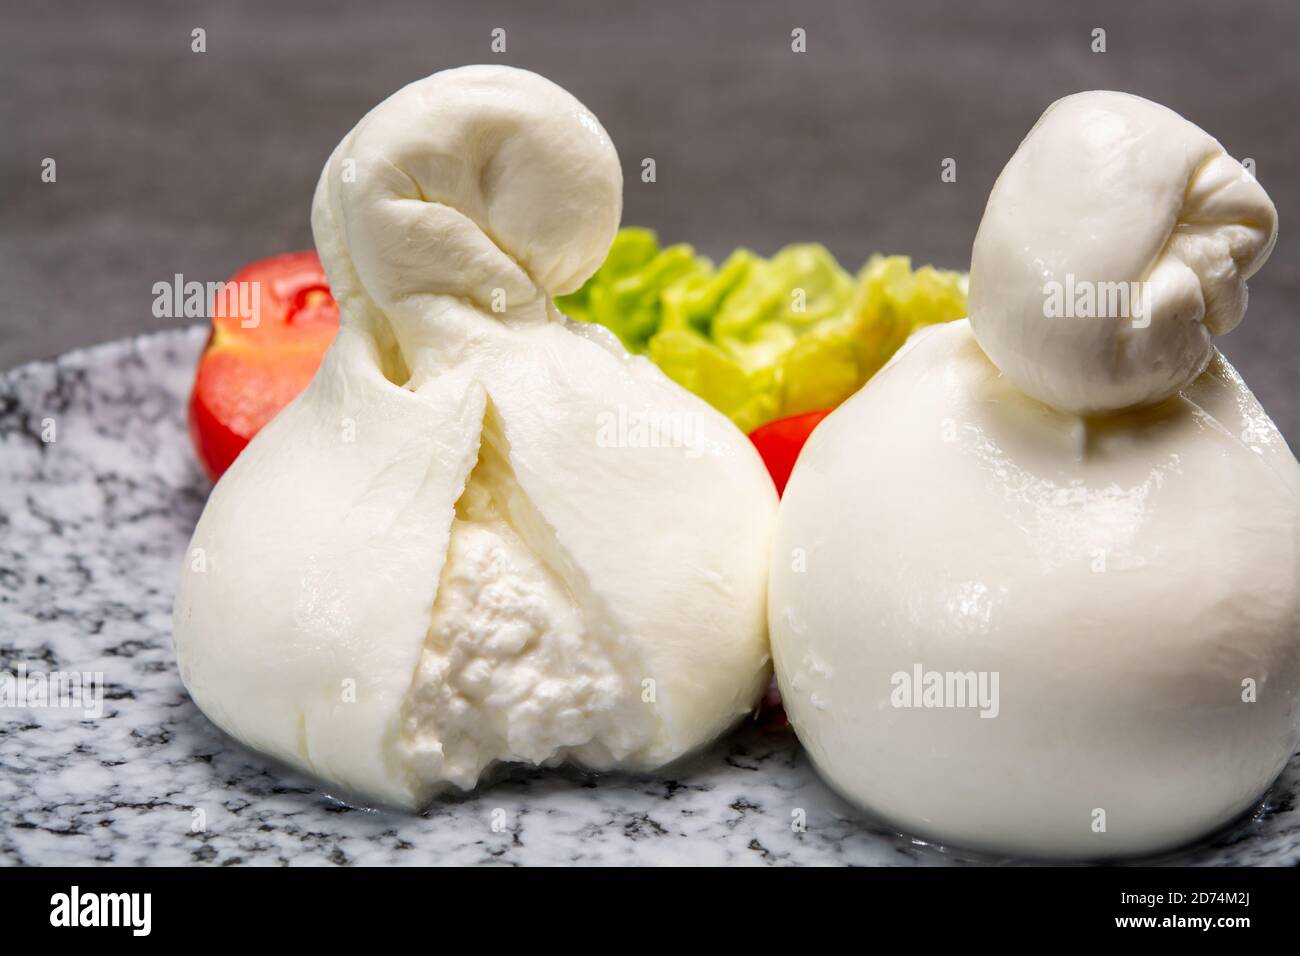 Cheese collection, region of soft from balls cream up Photo in inside burrata italian - Alamy cheese close made mozzarella Stock Apulia with white